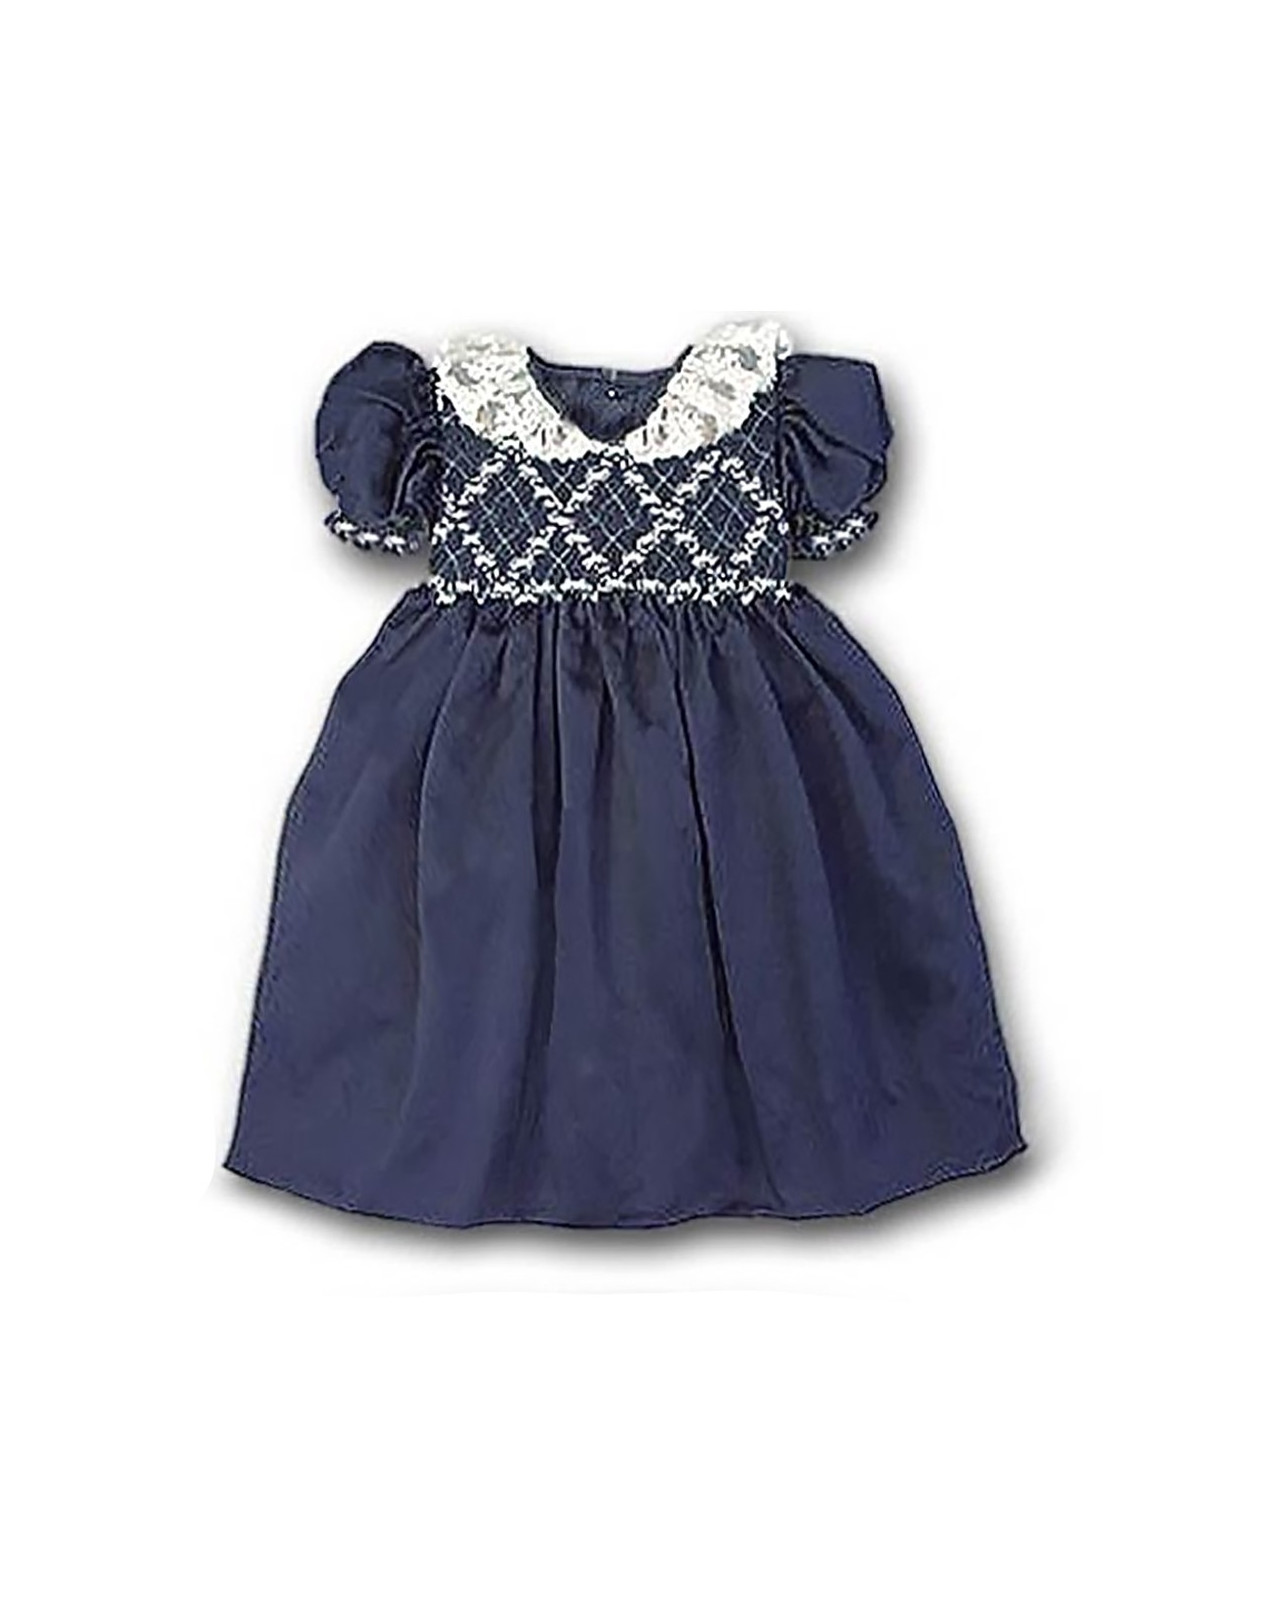 Giocasta girl smocked dress with valancienne lace collar